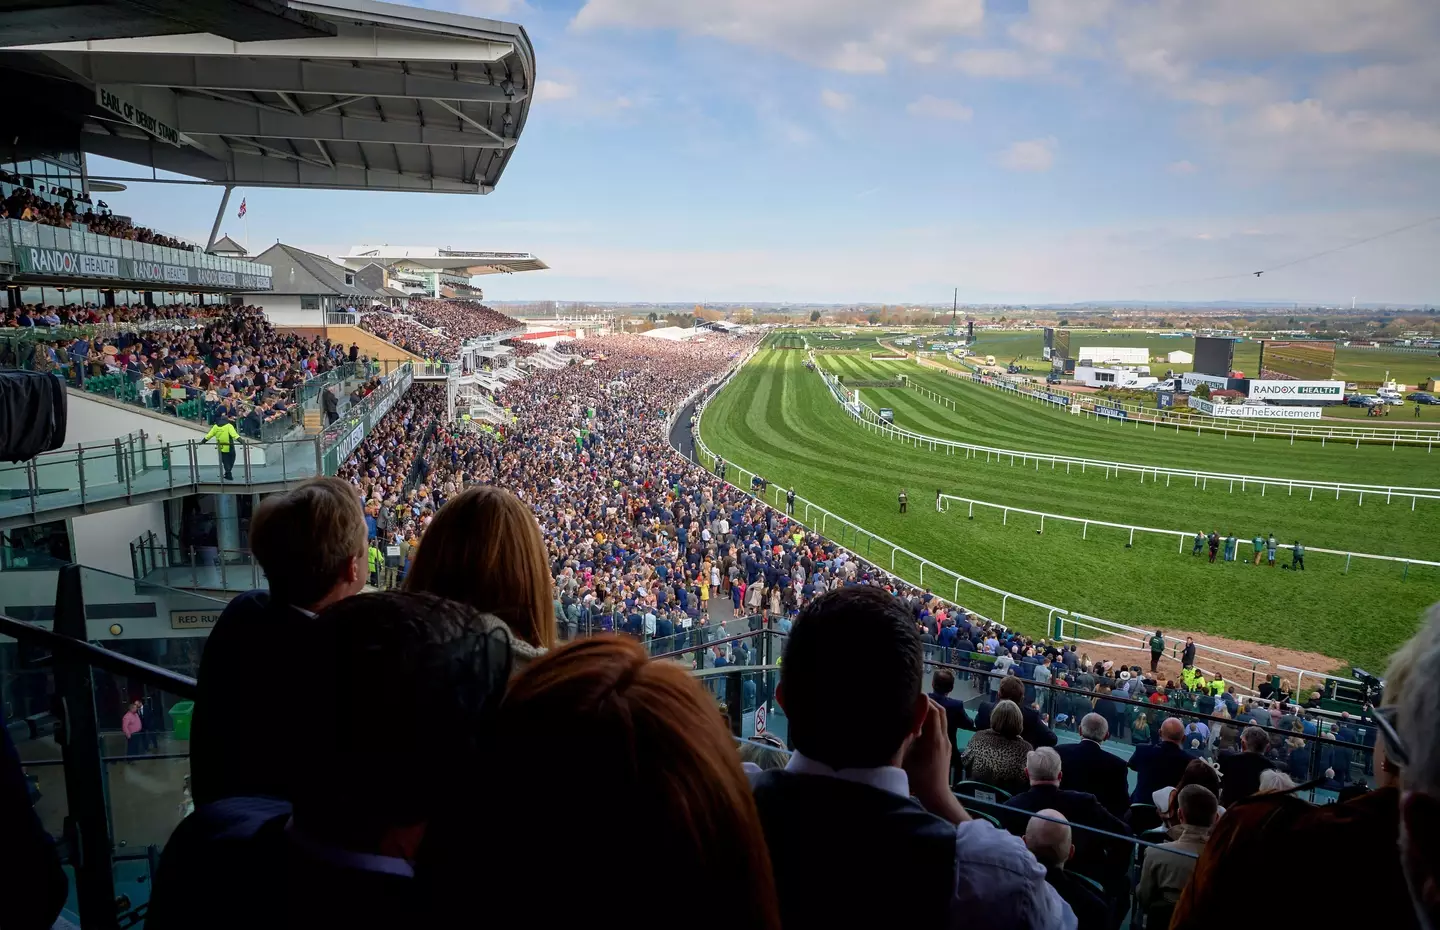 It has emerged that vegan activists planned to 'ruin' the Grand National this year.